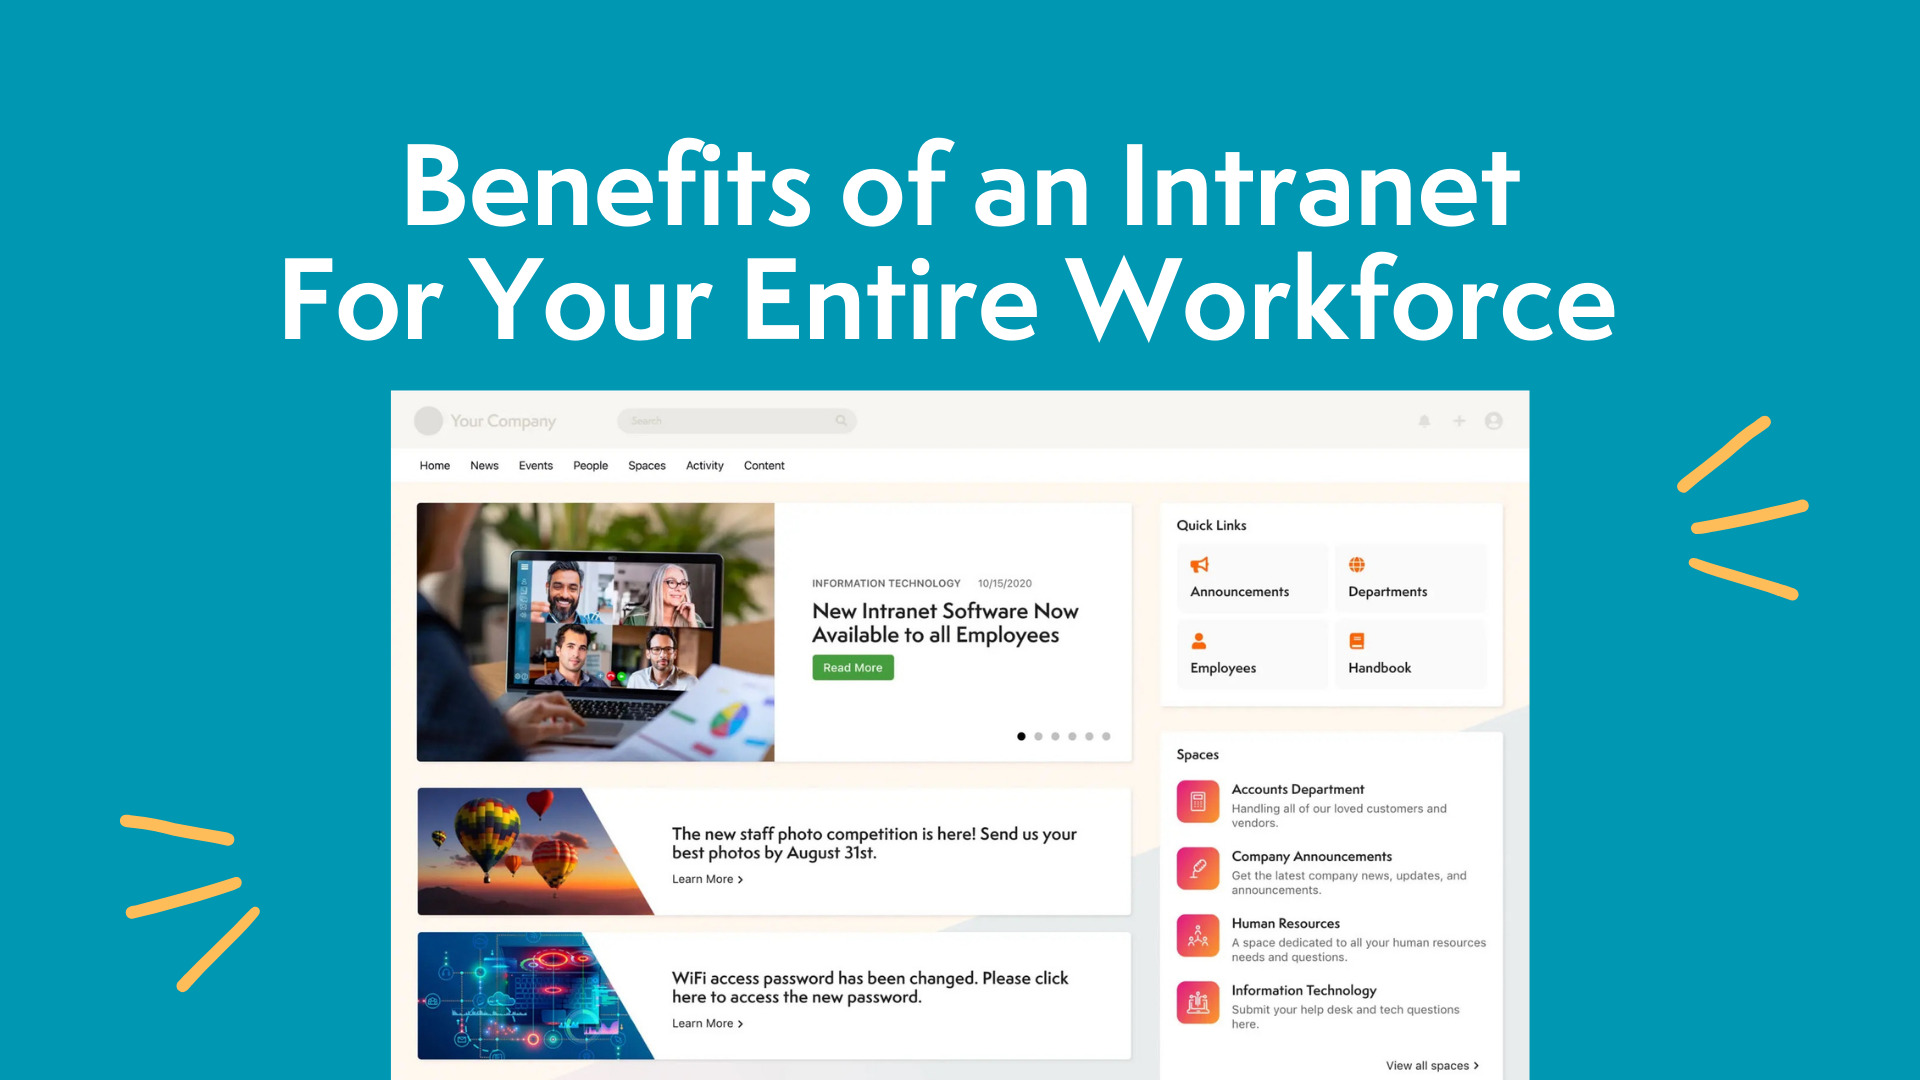 31 Benefits of an Intranet for Your Entire Workforce